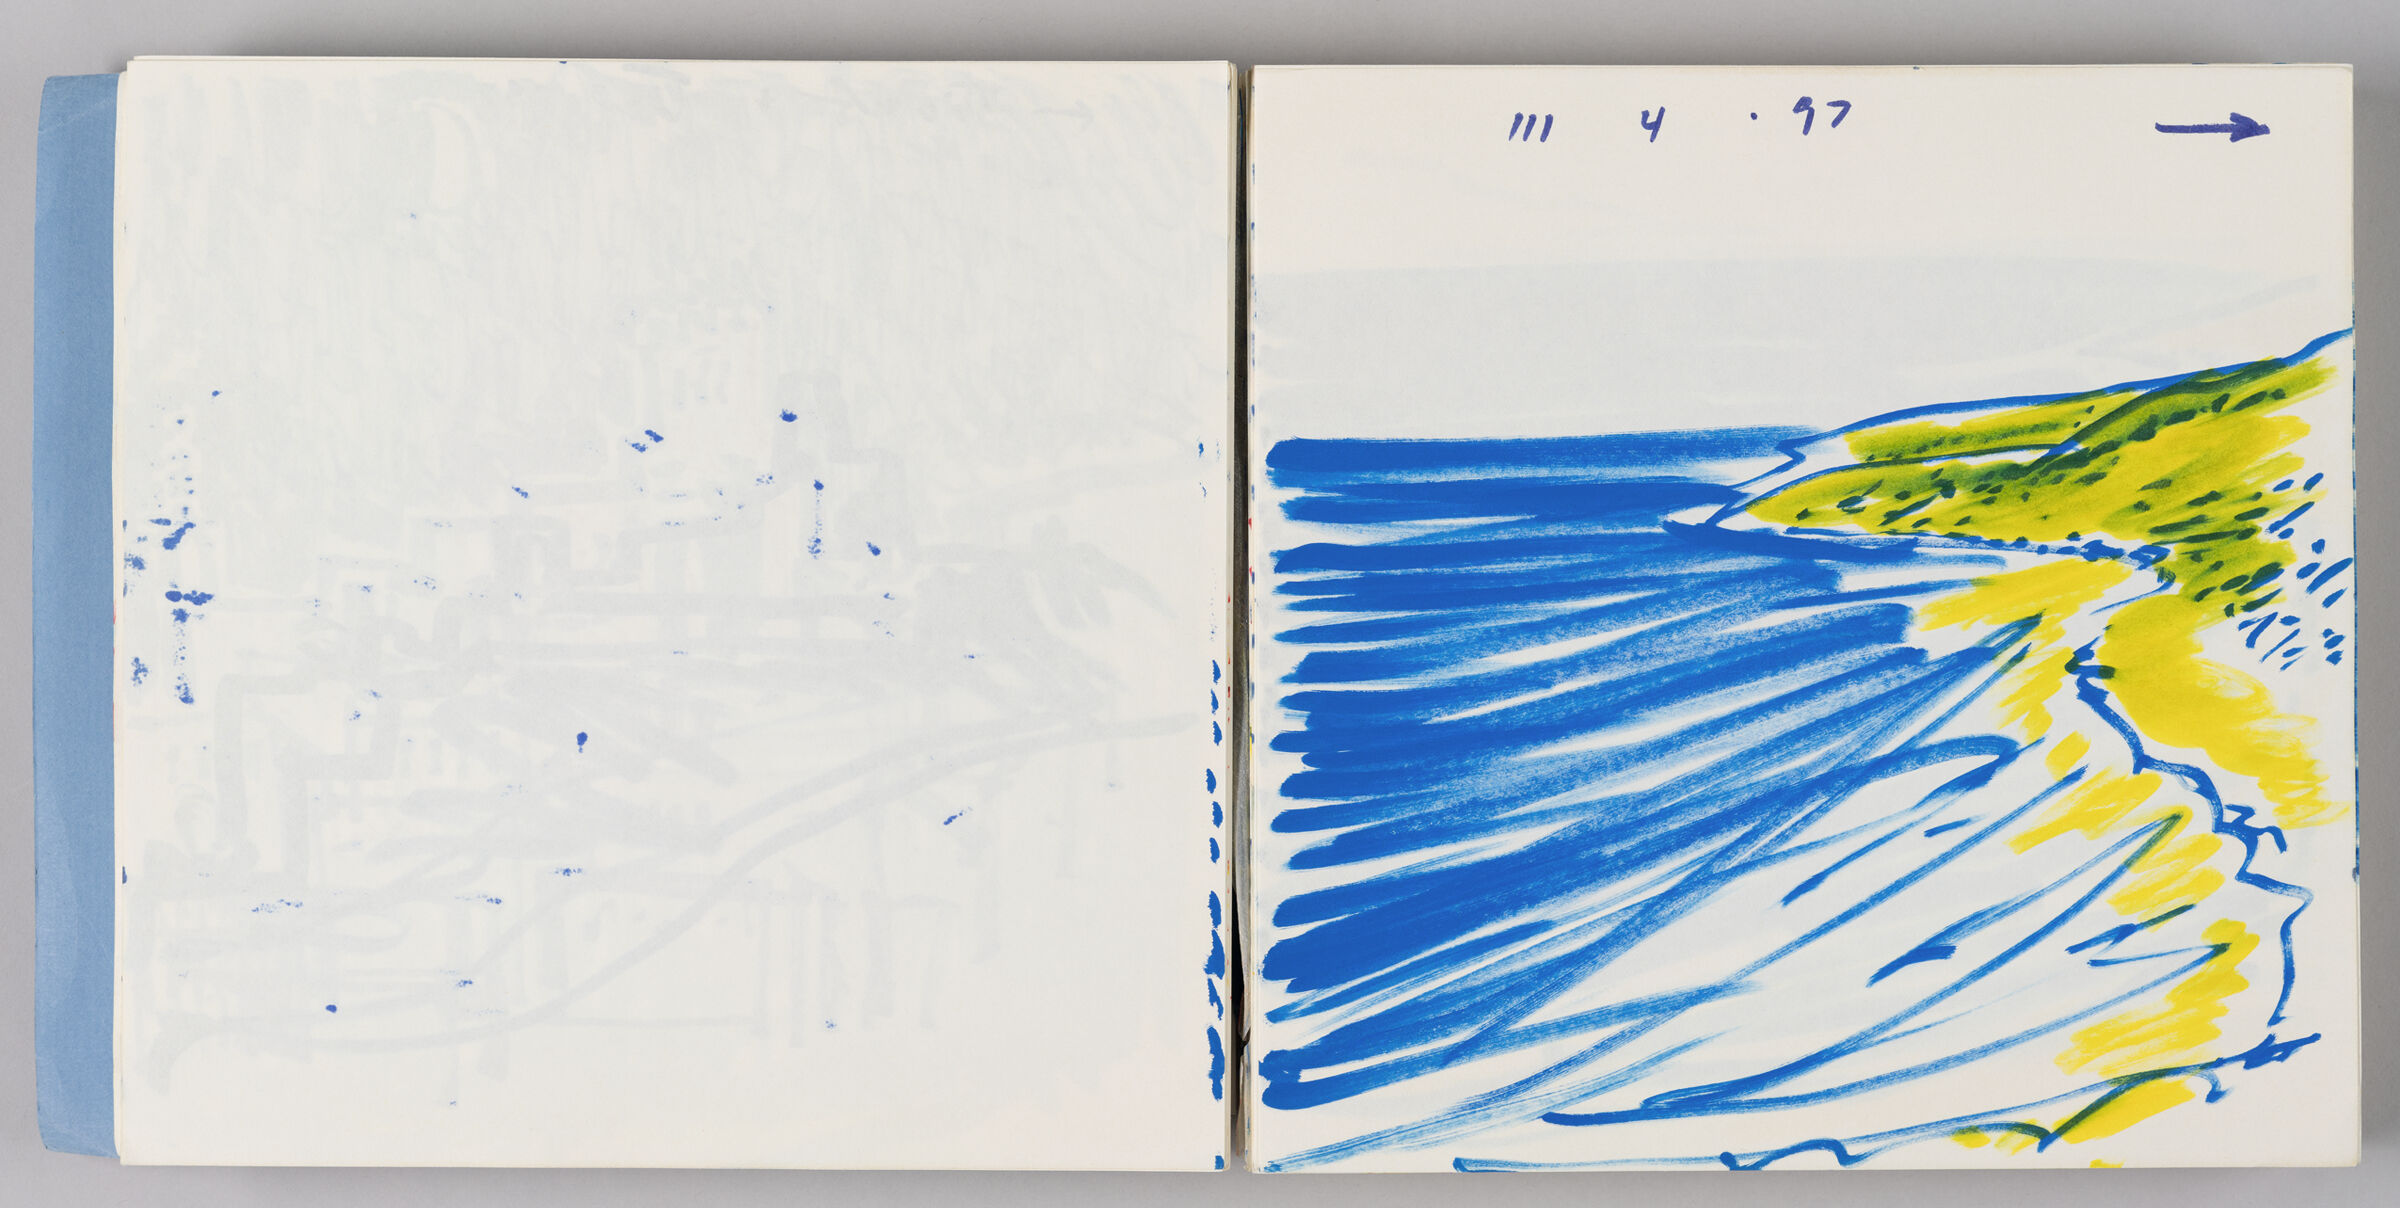 Untitled (Bleed-Through Of Previous Page, Left Page); Untitled (Essaouira Beach, Right Page)
